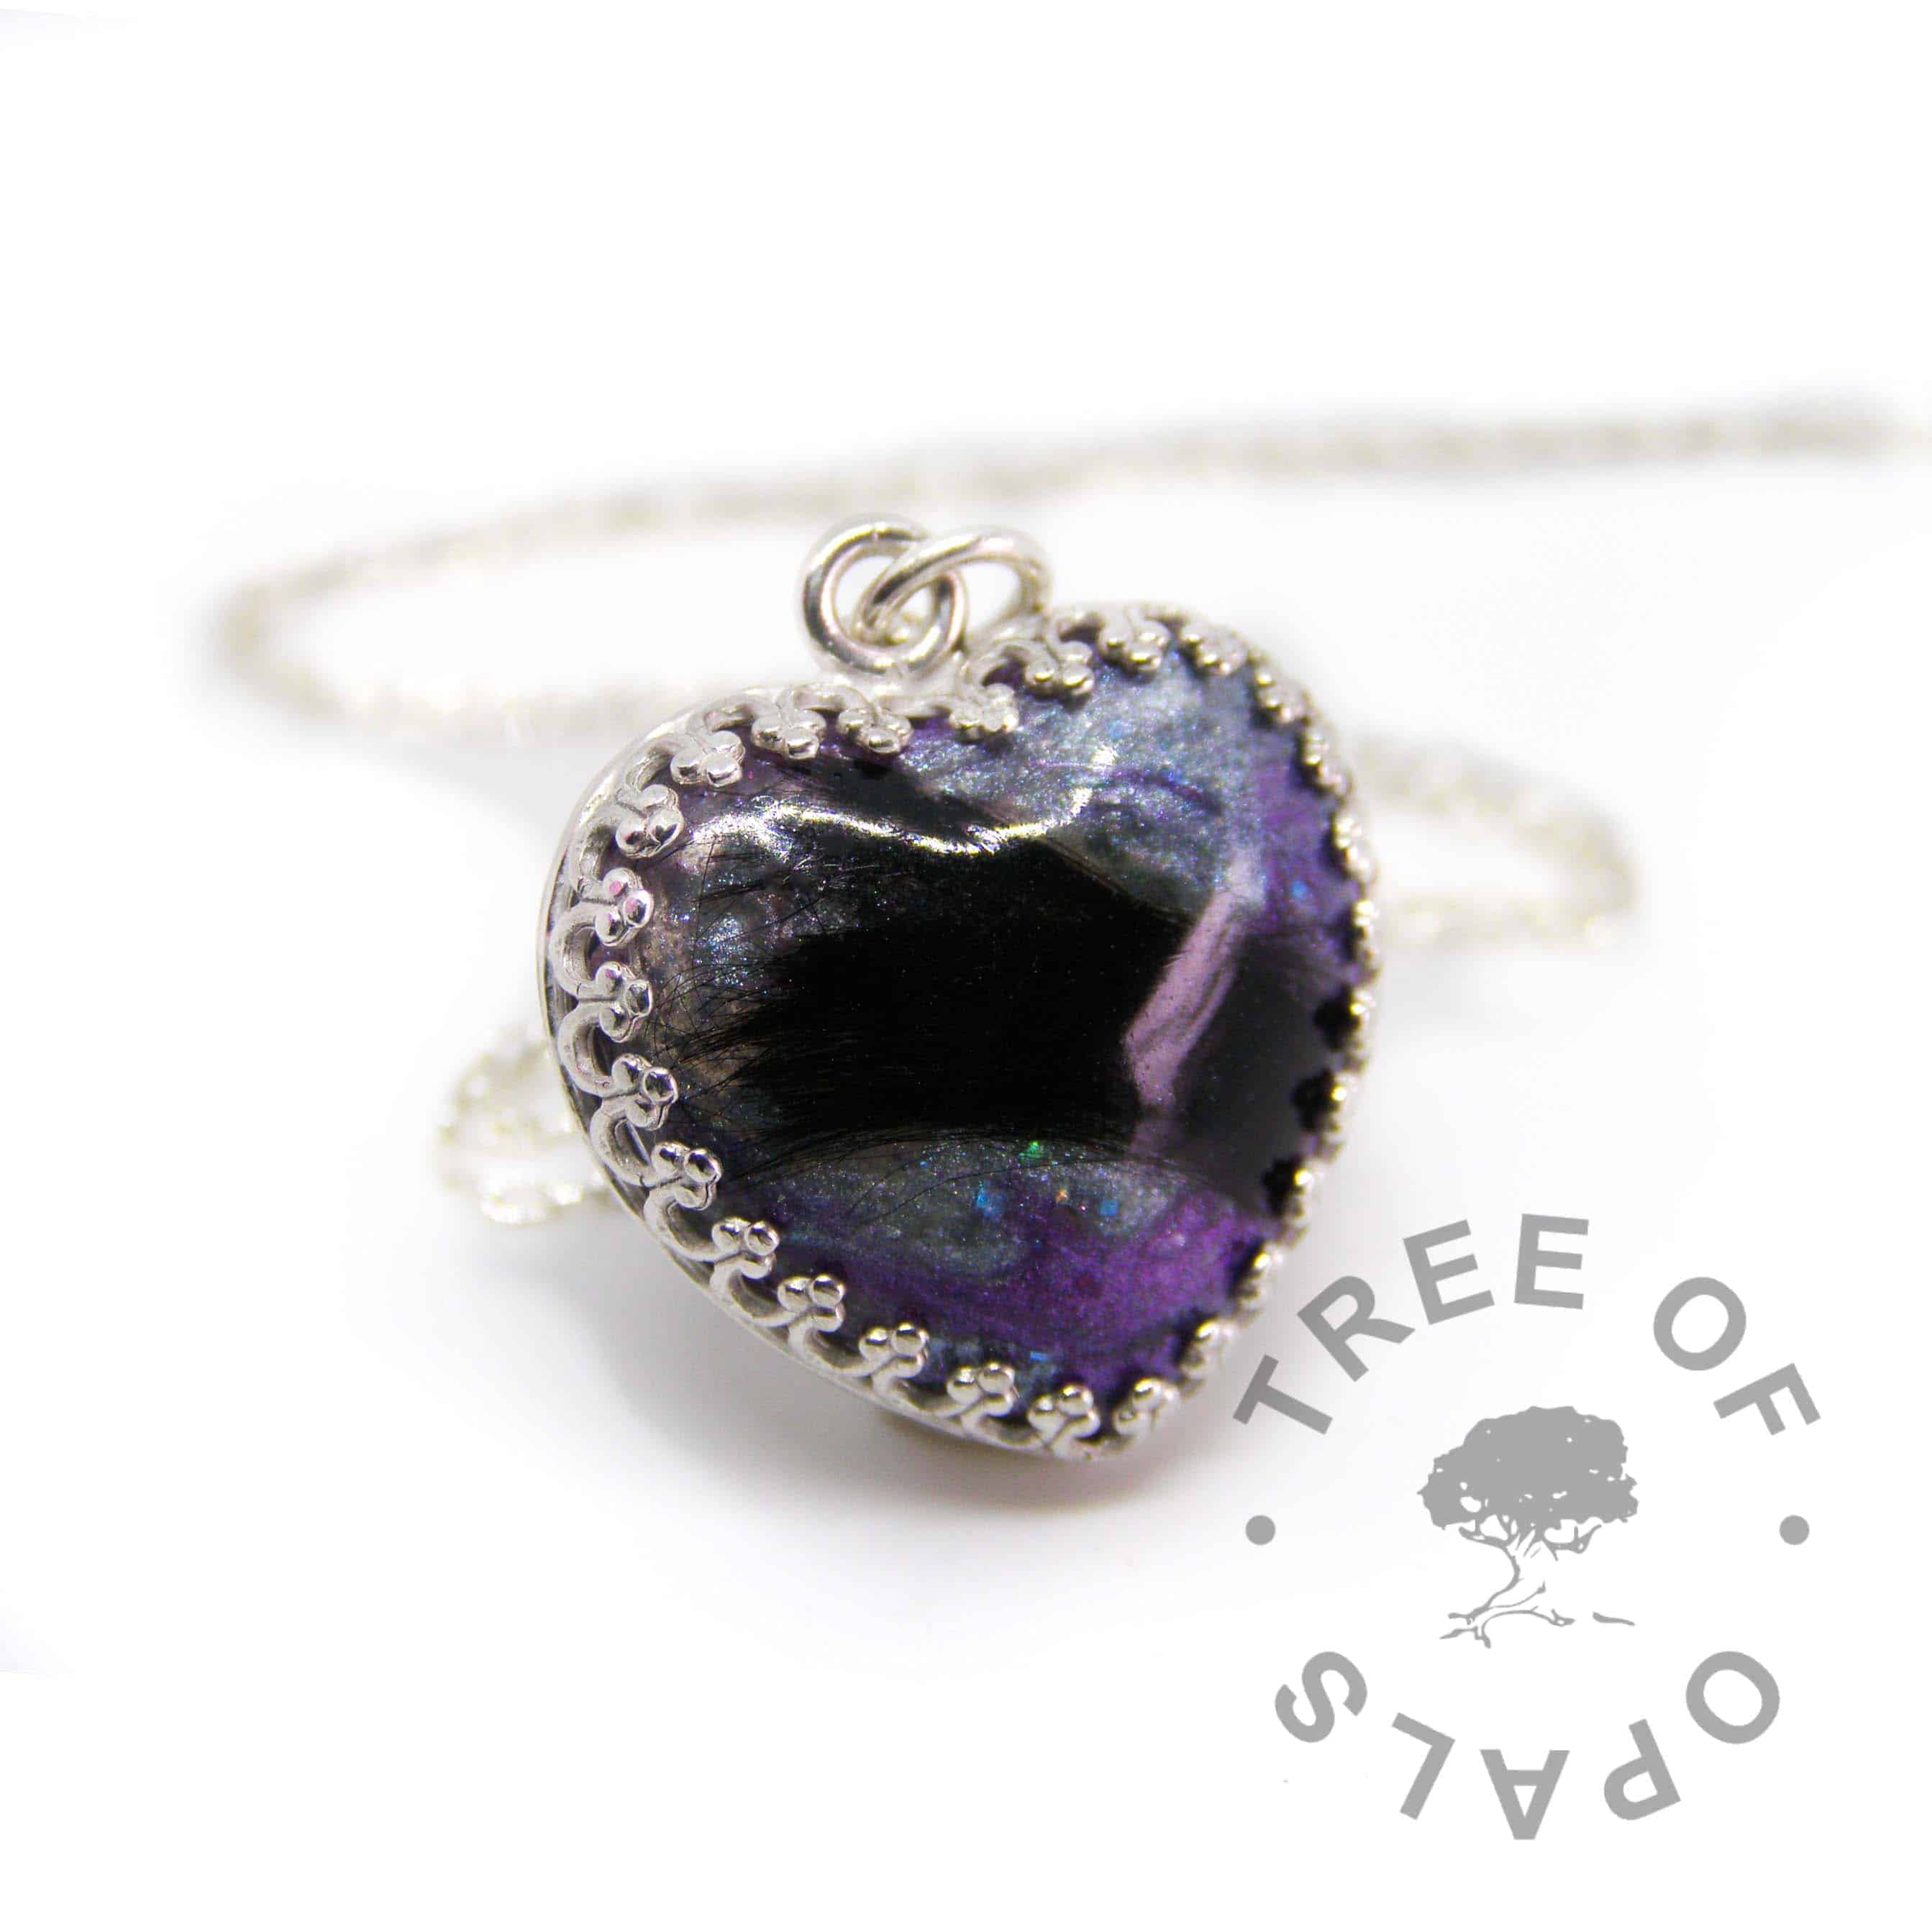 lock of hair heart necklace mermaid teal and black fur, with a little deep purple colour. Solid sterling silver with a 20" fine weight chain (50cm)